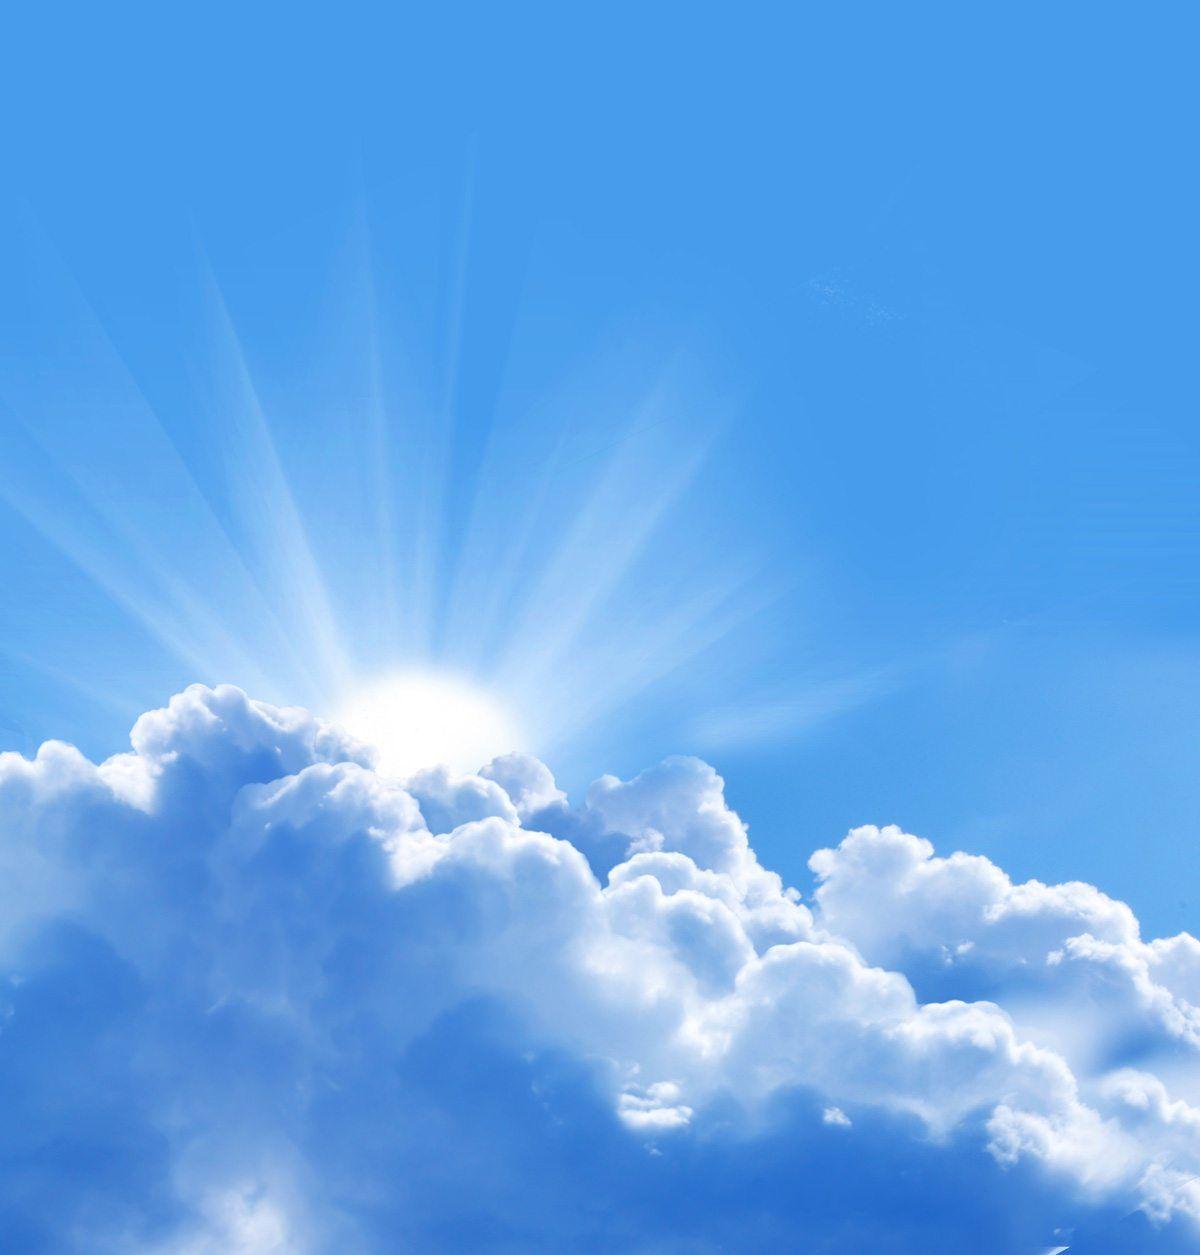 Sky and Clouds Wallpapers - Top Free Sky and Clouds Backgrounds ...